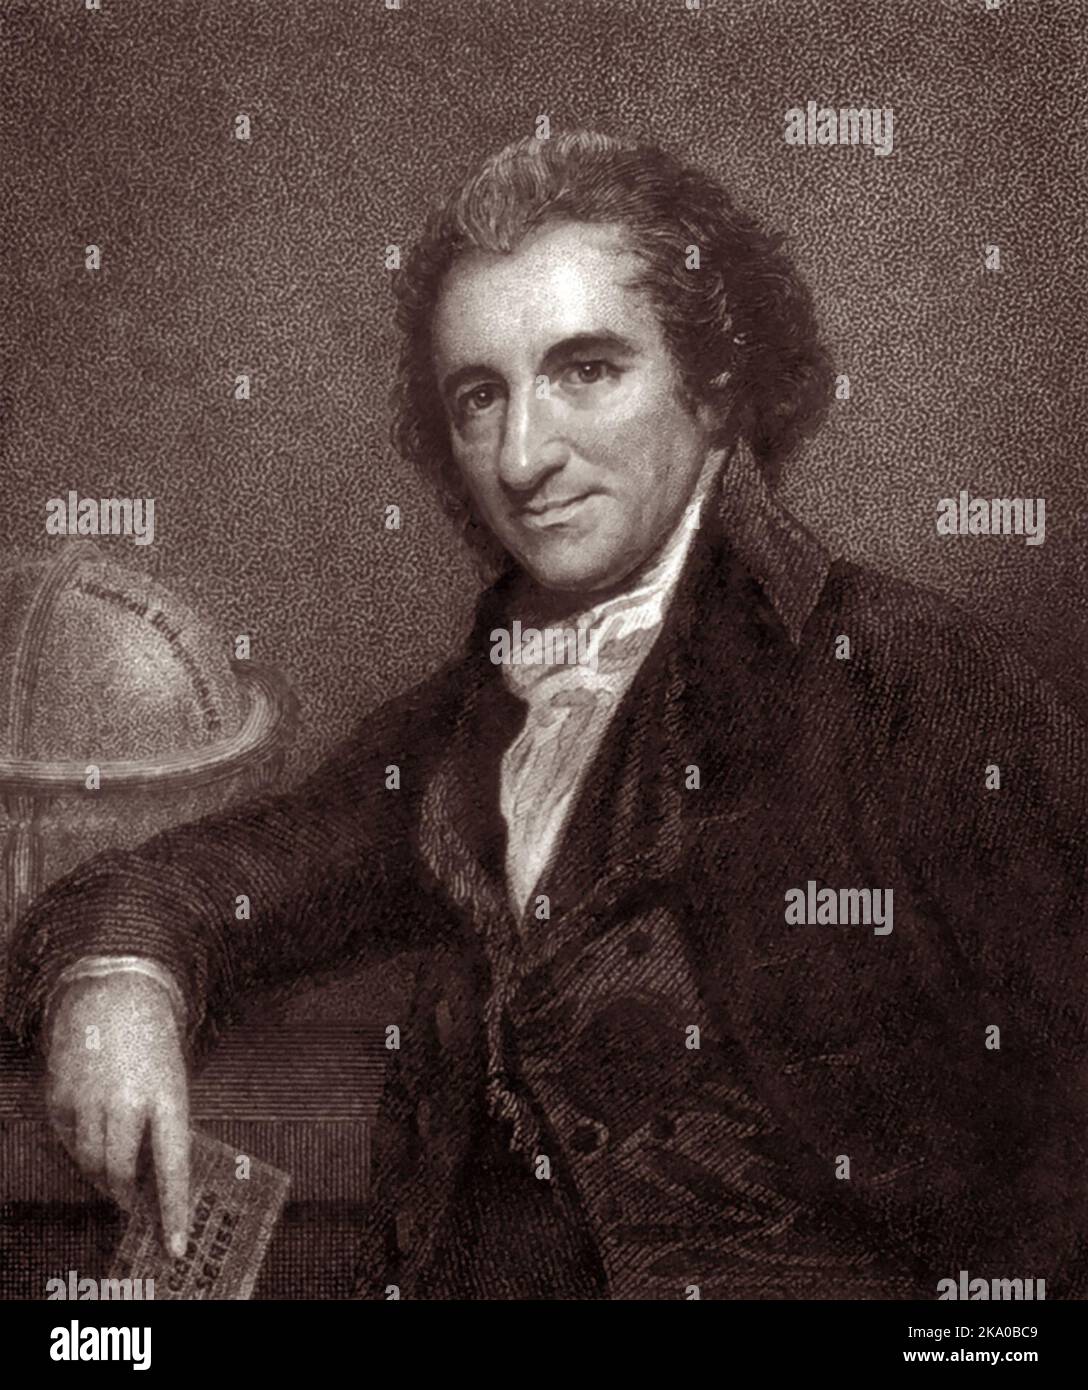 Thomas Paine (1737-1809), English-born American political activist, philosopher, political theorist, and revolutionary who authored Common Sense (1776) and The American Crisis (1776–1783), two of the most influential pamphlets at the start of the American Revolution, Stock Photo